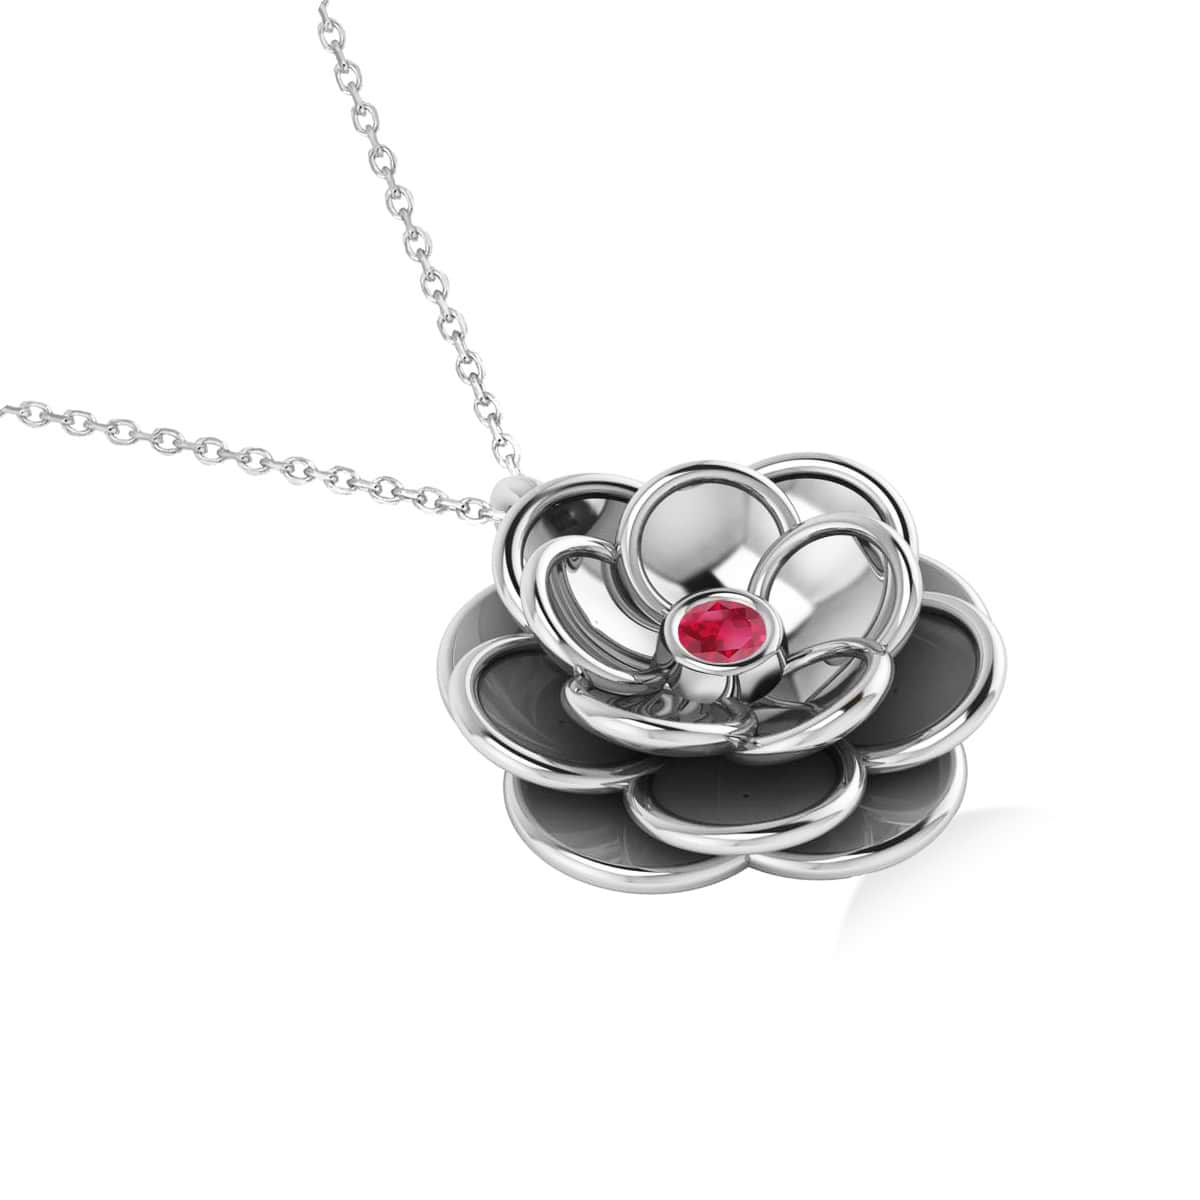 Ruby Round Flower Pendant Necklace 14k White Gold (0.05ct)